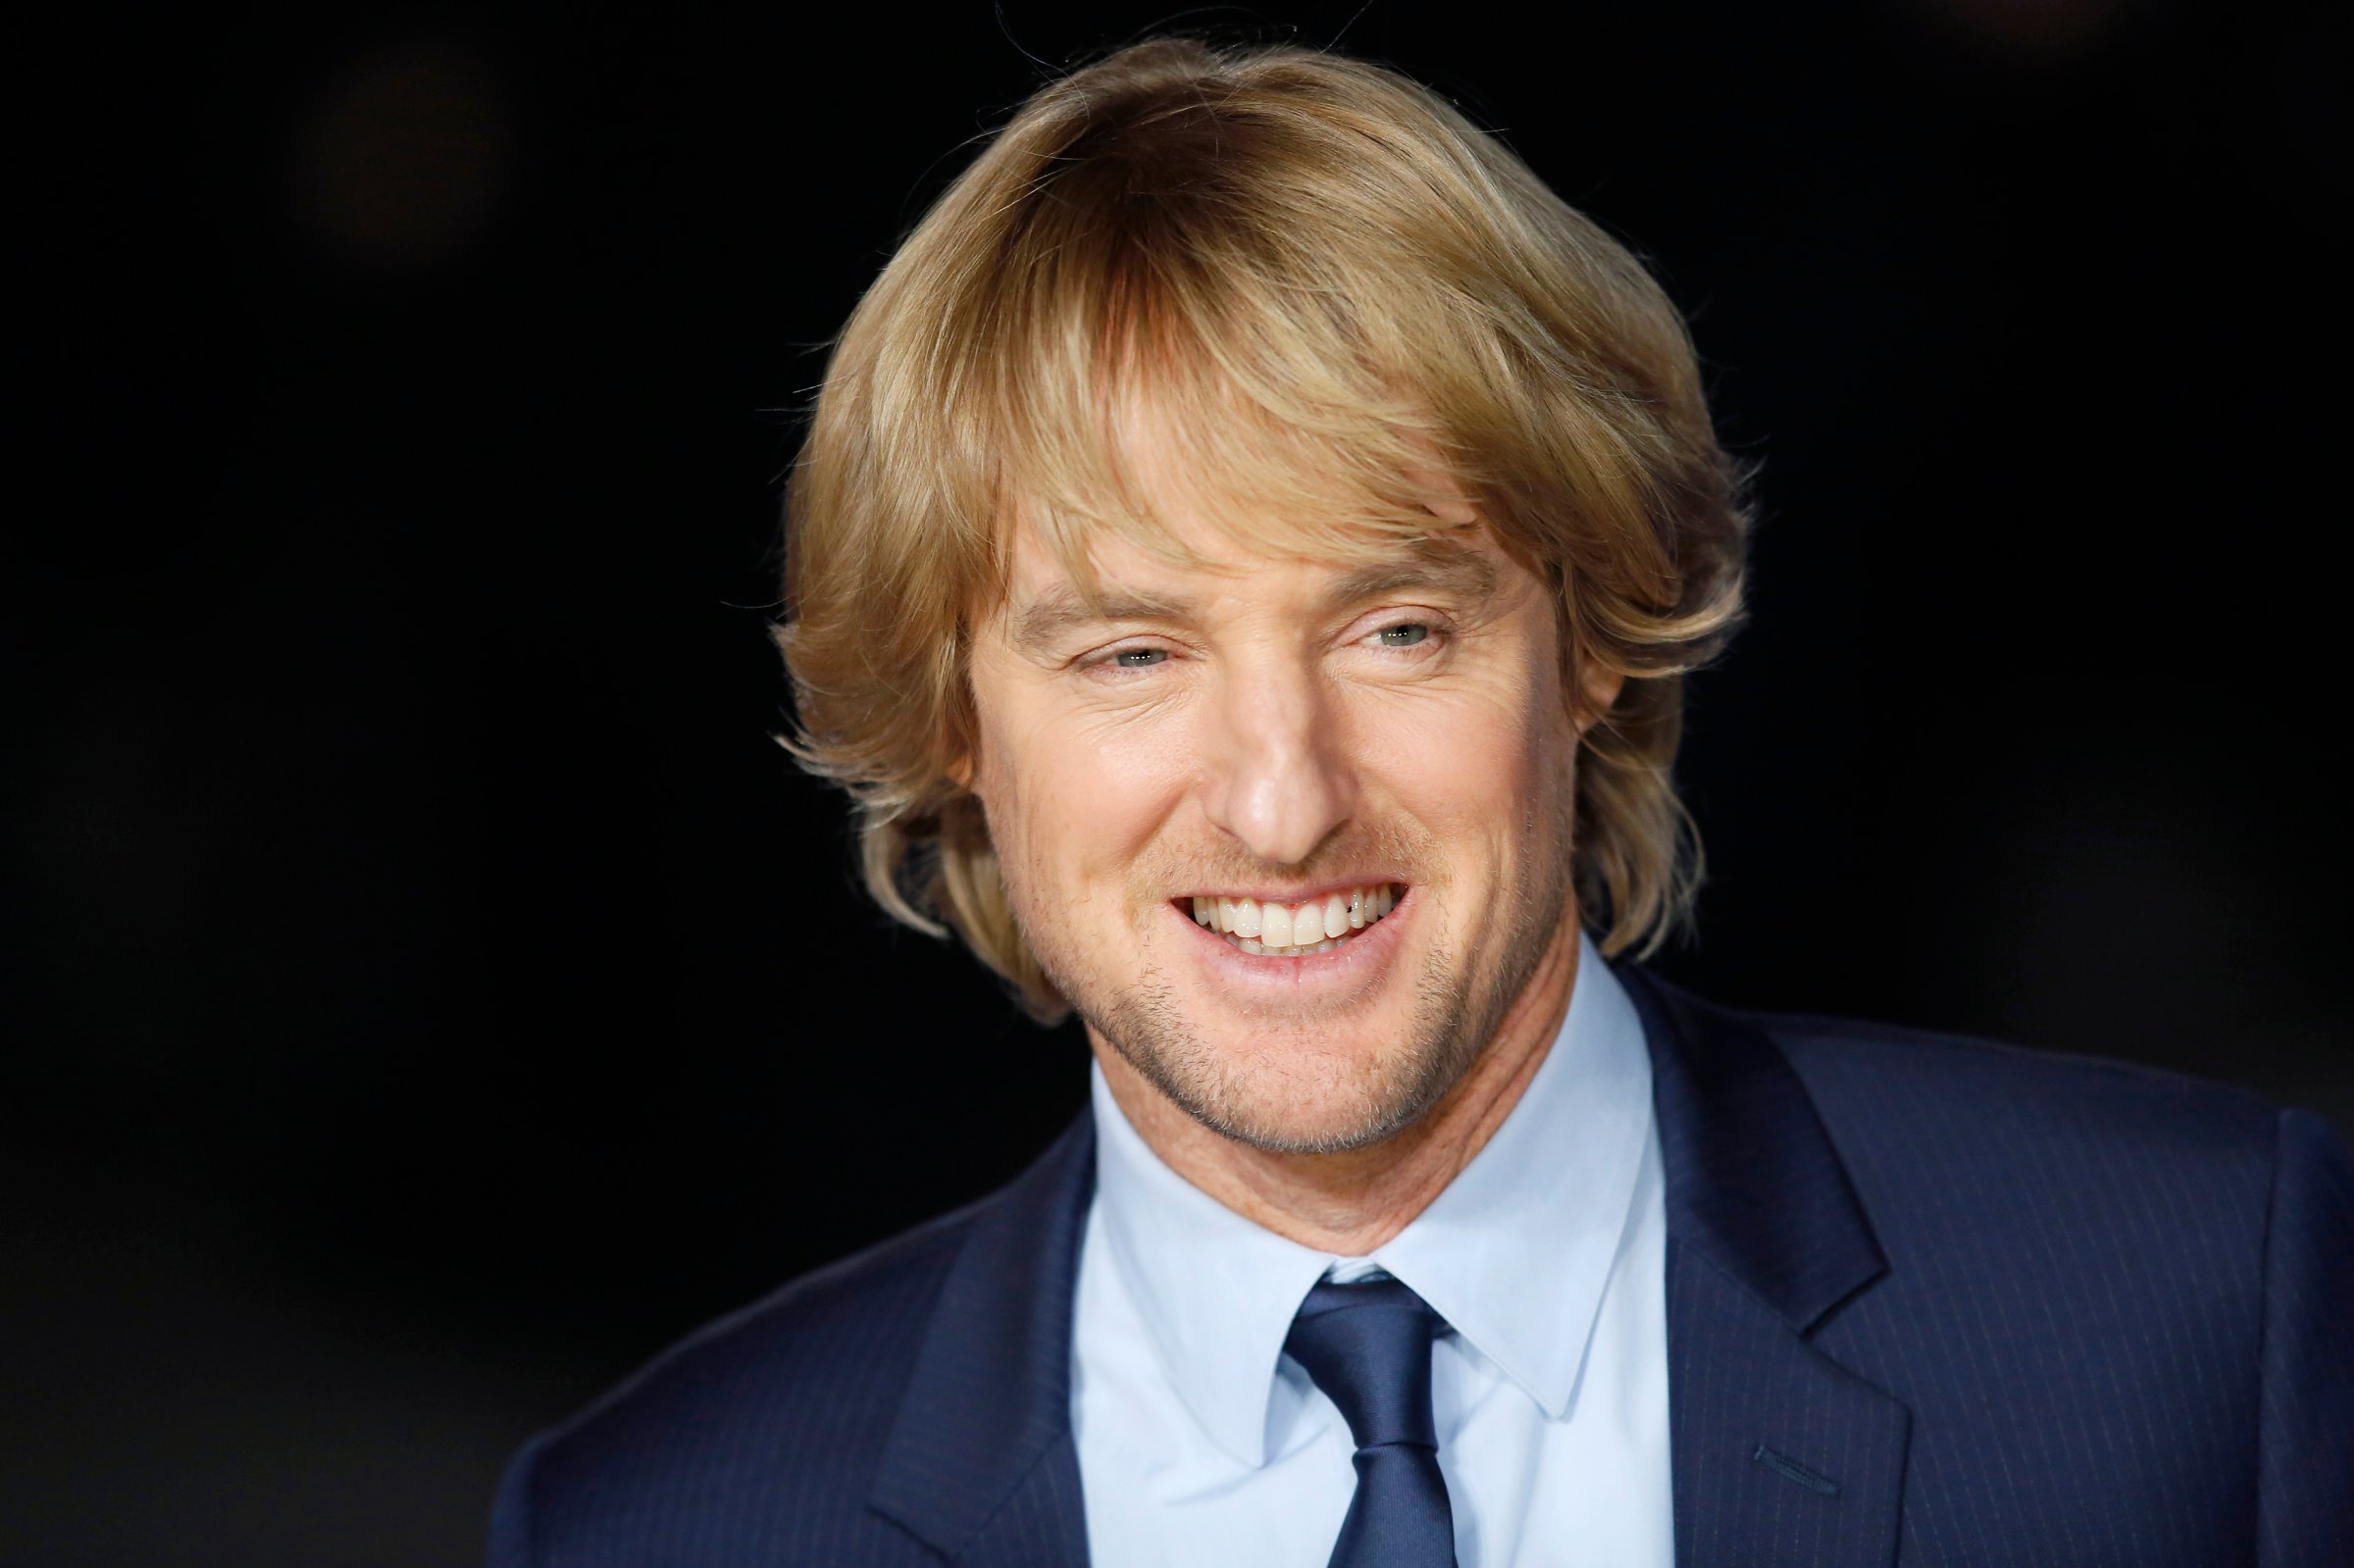 Actor Owen Wilson arrives for the European premiere of "Night at the Museum: Secret of the Tomb" at Leicester Square in London December 15, 2014.